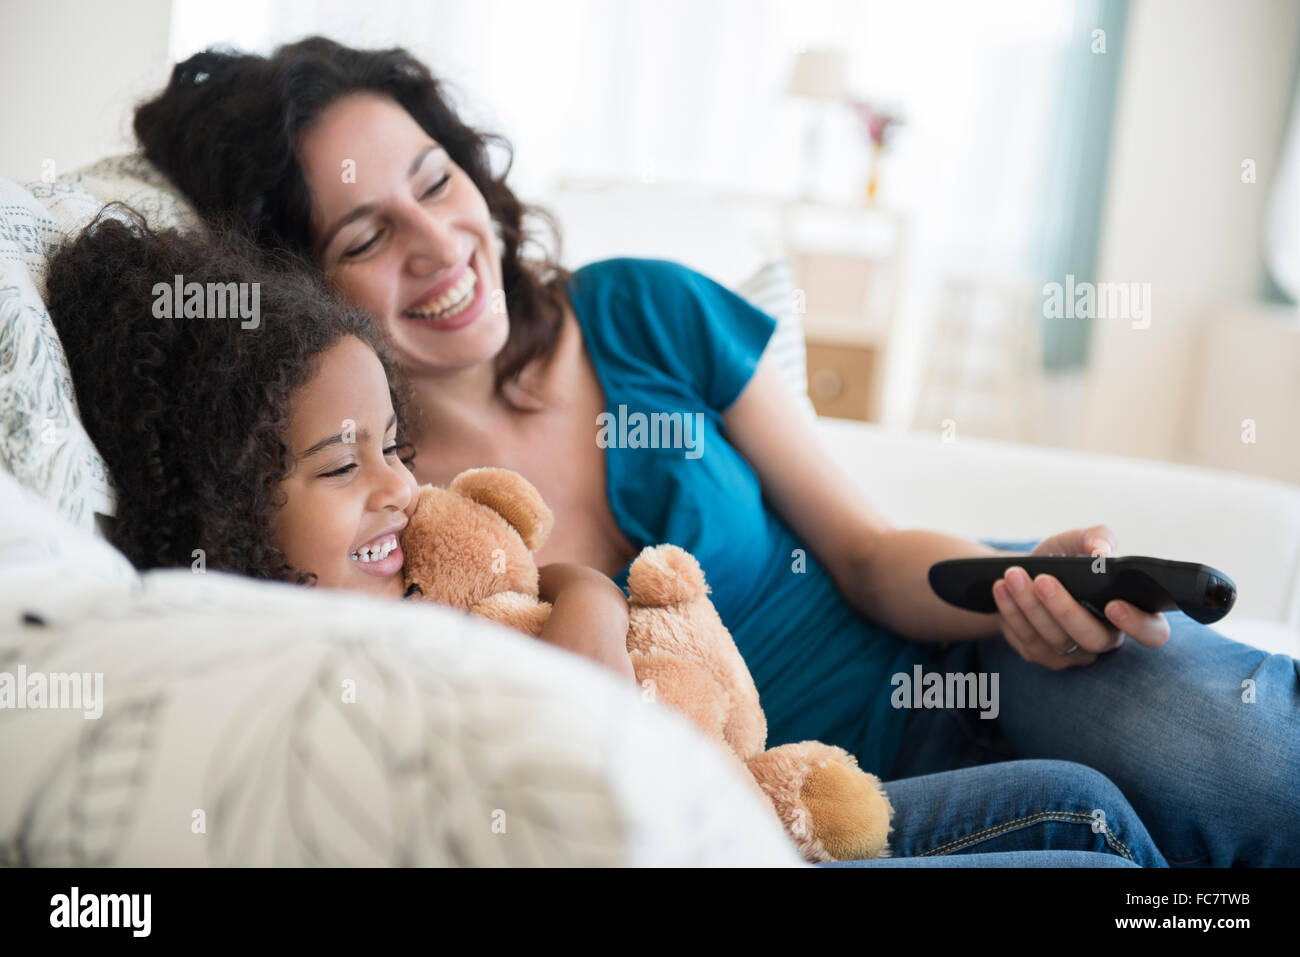 Mother and daughter watching television on sofa Stock Photo